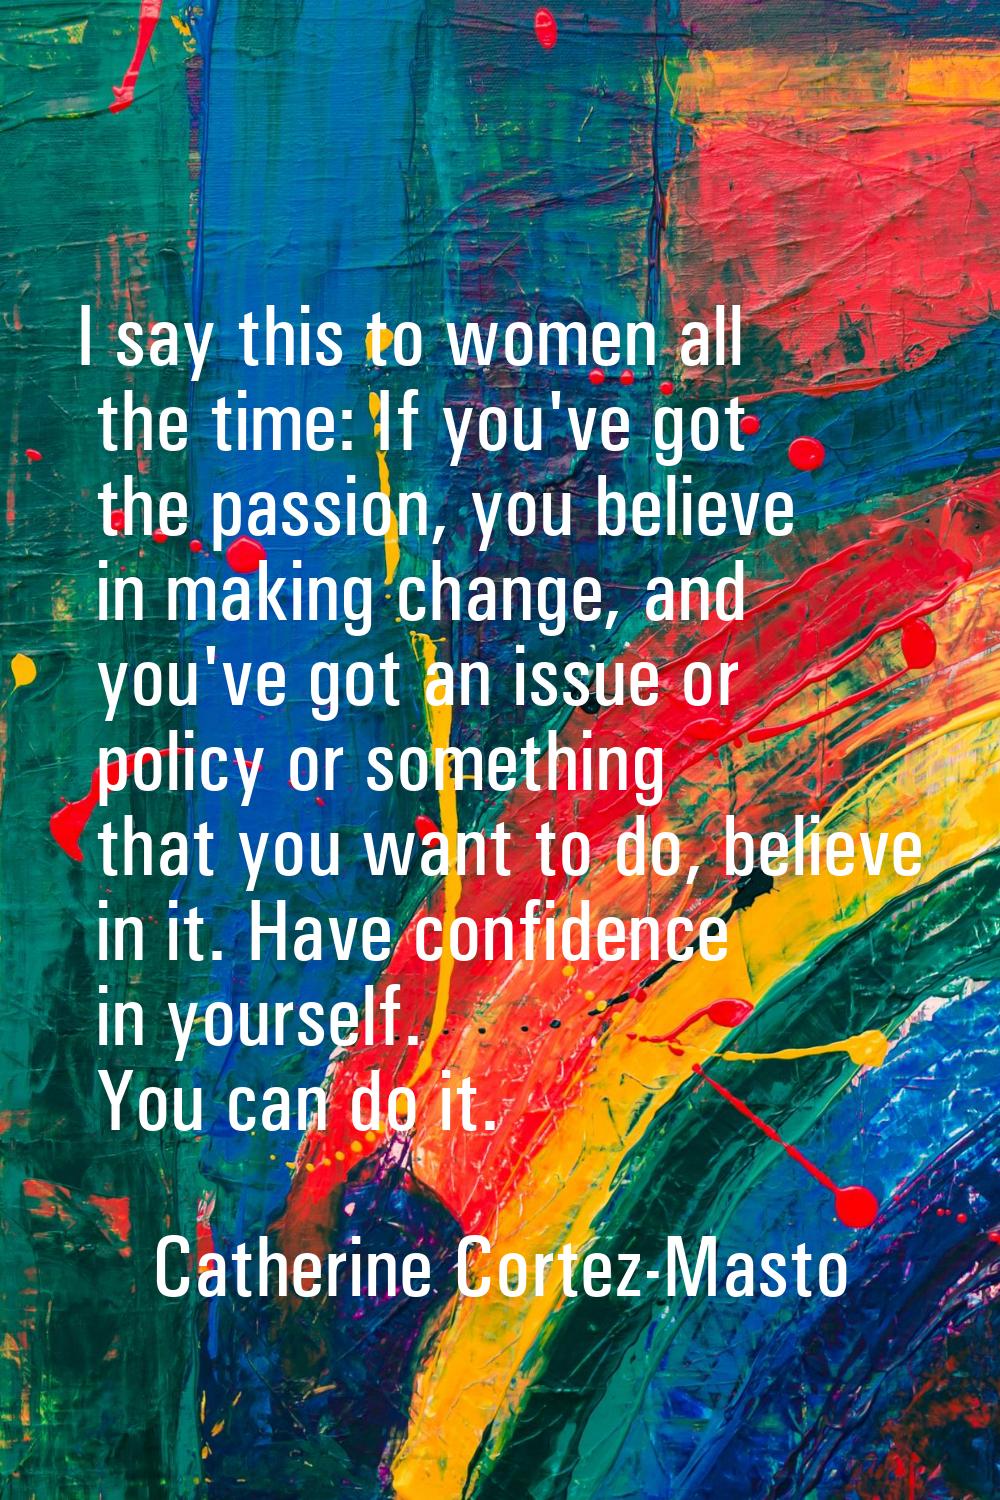 I say this to women all the time: If you've got the passion, you believe in making change, and you'